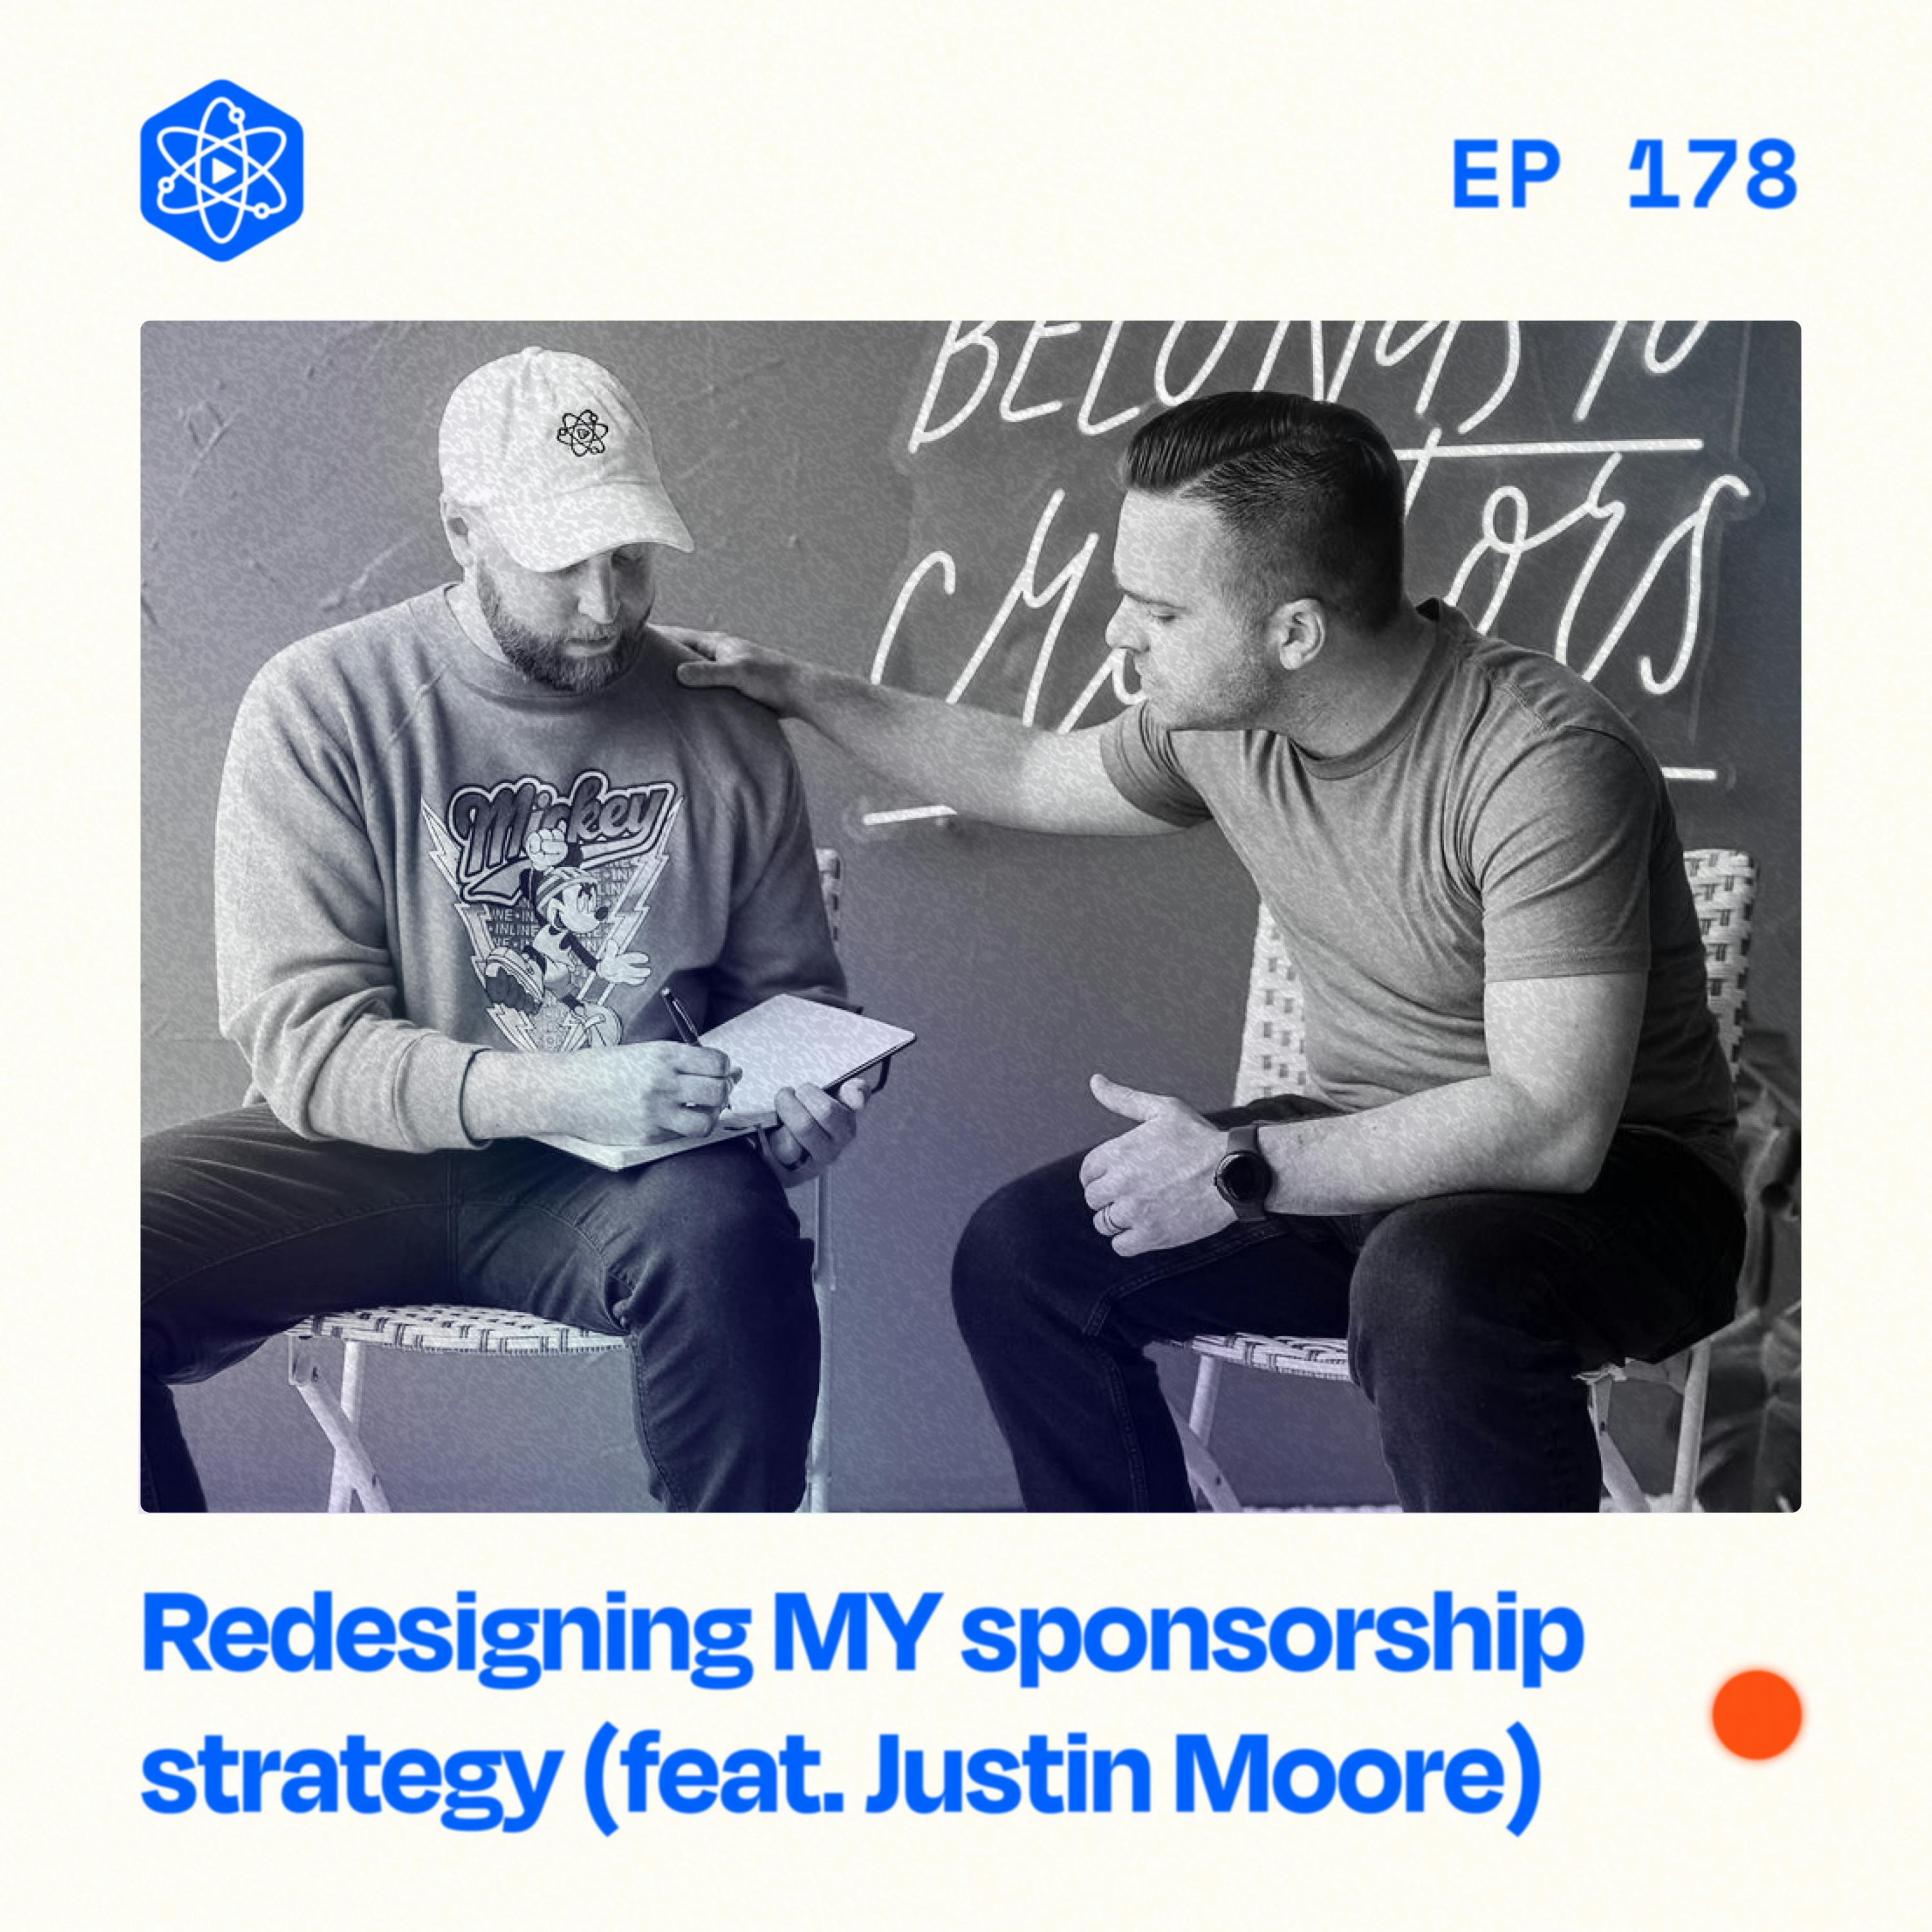 Redesigning MY sponsorship strategy (feat. Justin Moore).